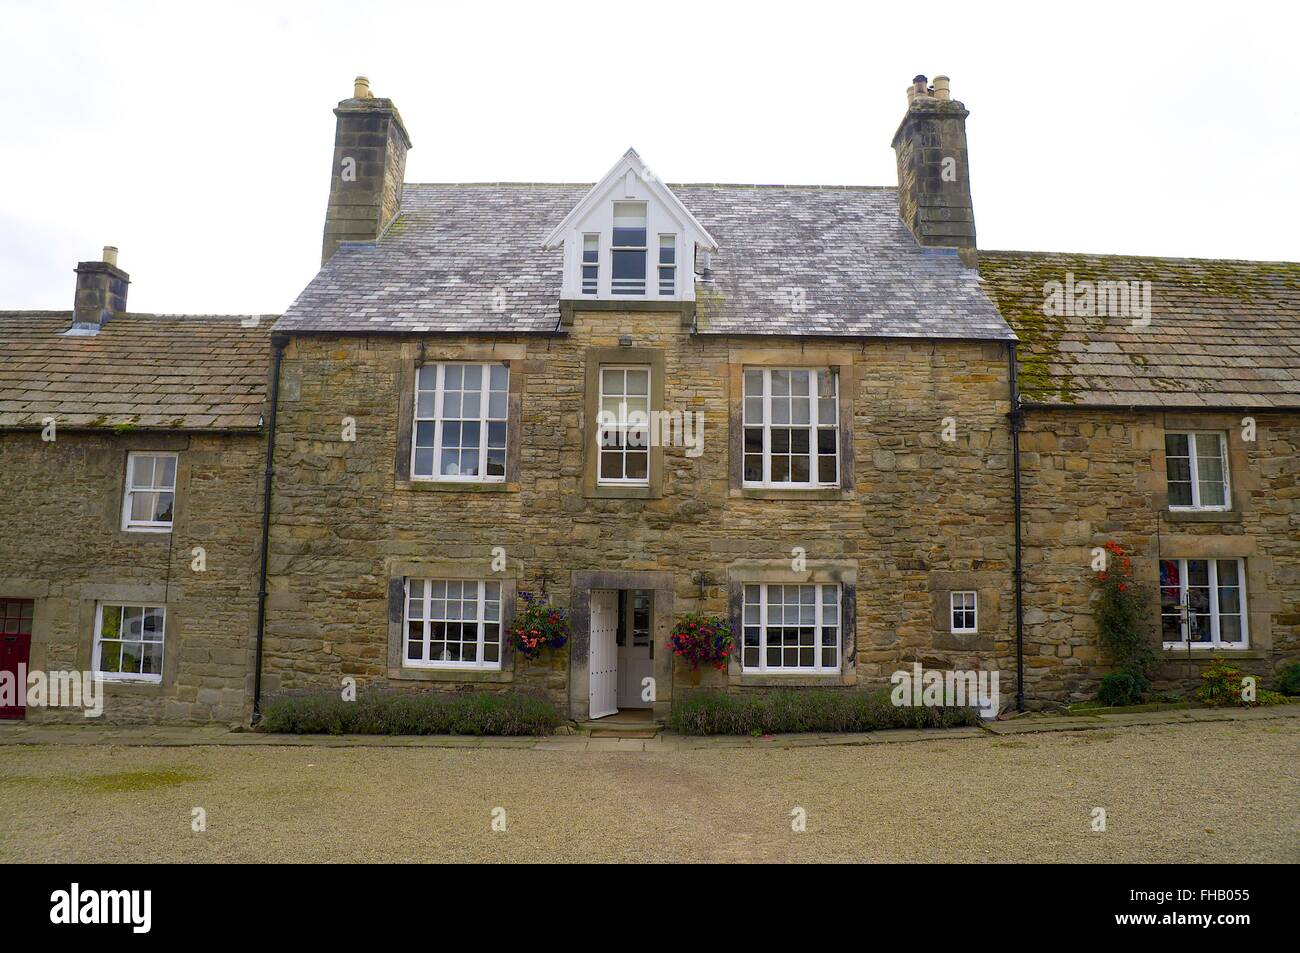 The Angel annexe. Lord Crewe Arms. Blanchland, Derwent Valley, North Pennines Area of Outstanding Natural Beauty, Northumberland Stock Photo